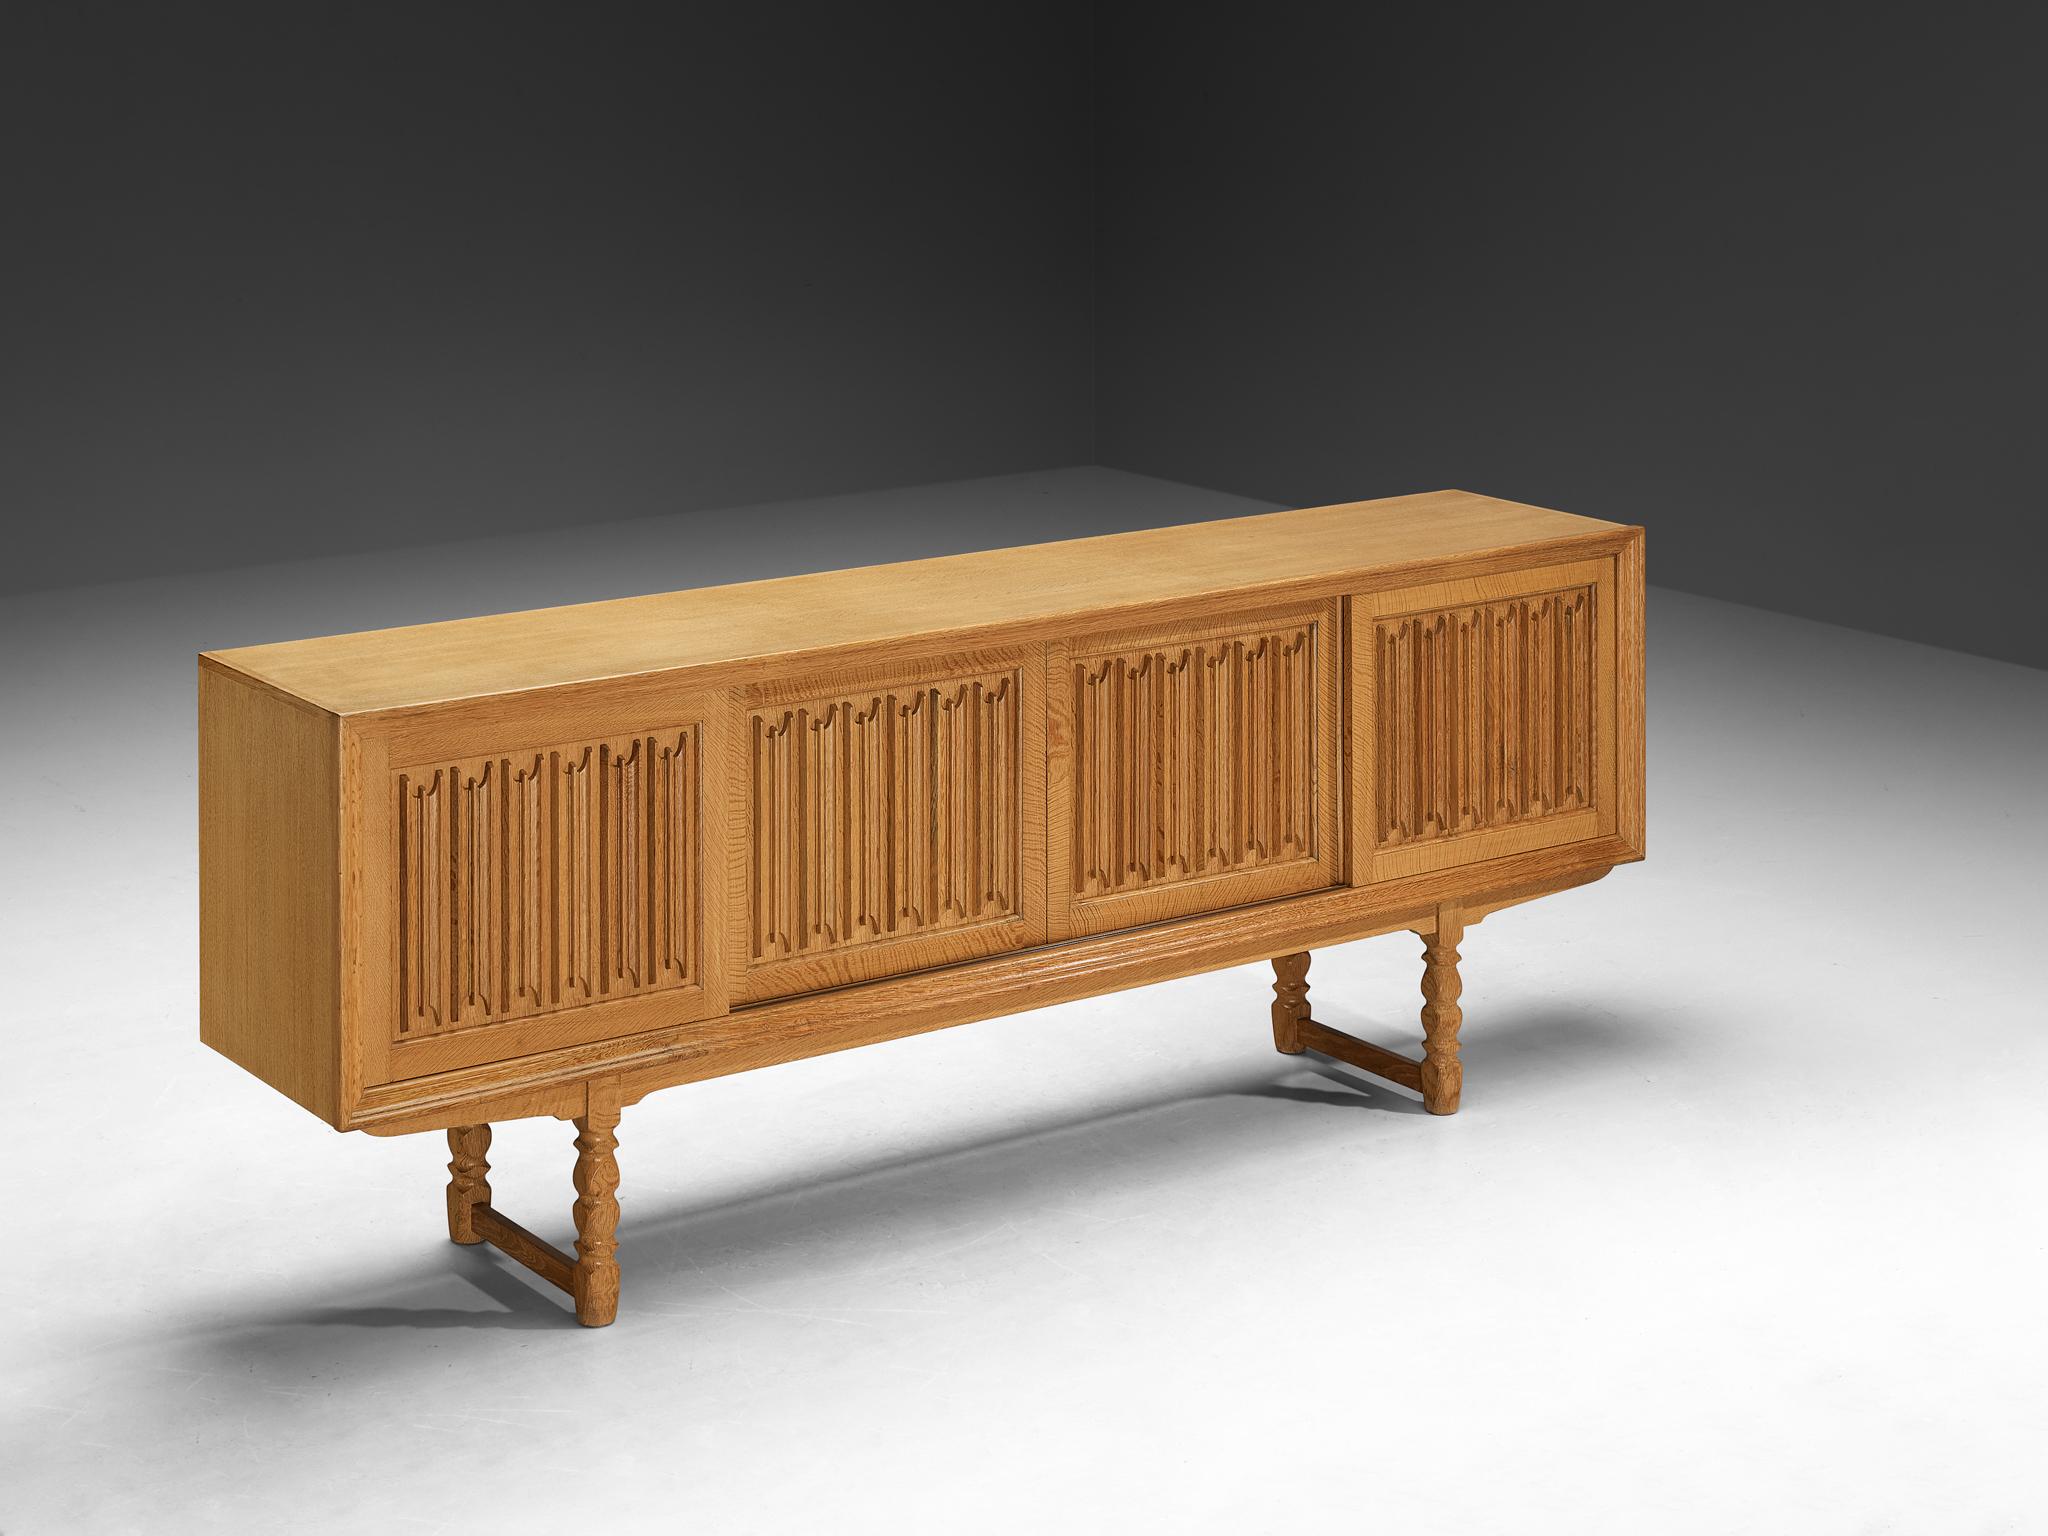 Sideboard, oak, Denmark, 1950s

Originating from Denmark, this credenza is designed around the 1950s by a skilled cabinetmaker whose identity remains unknown. The designer clearly understood how to design a high-quality piece of furniture. An